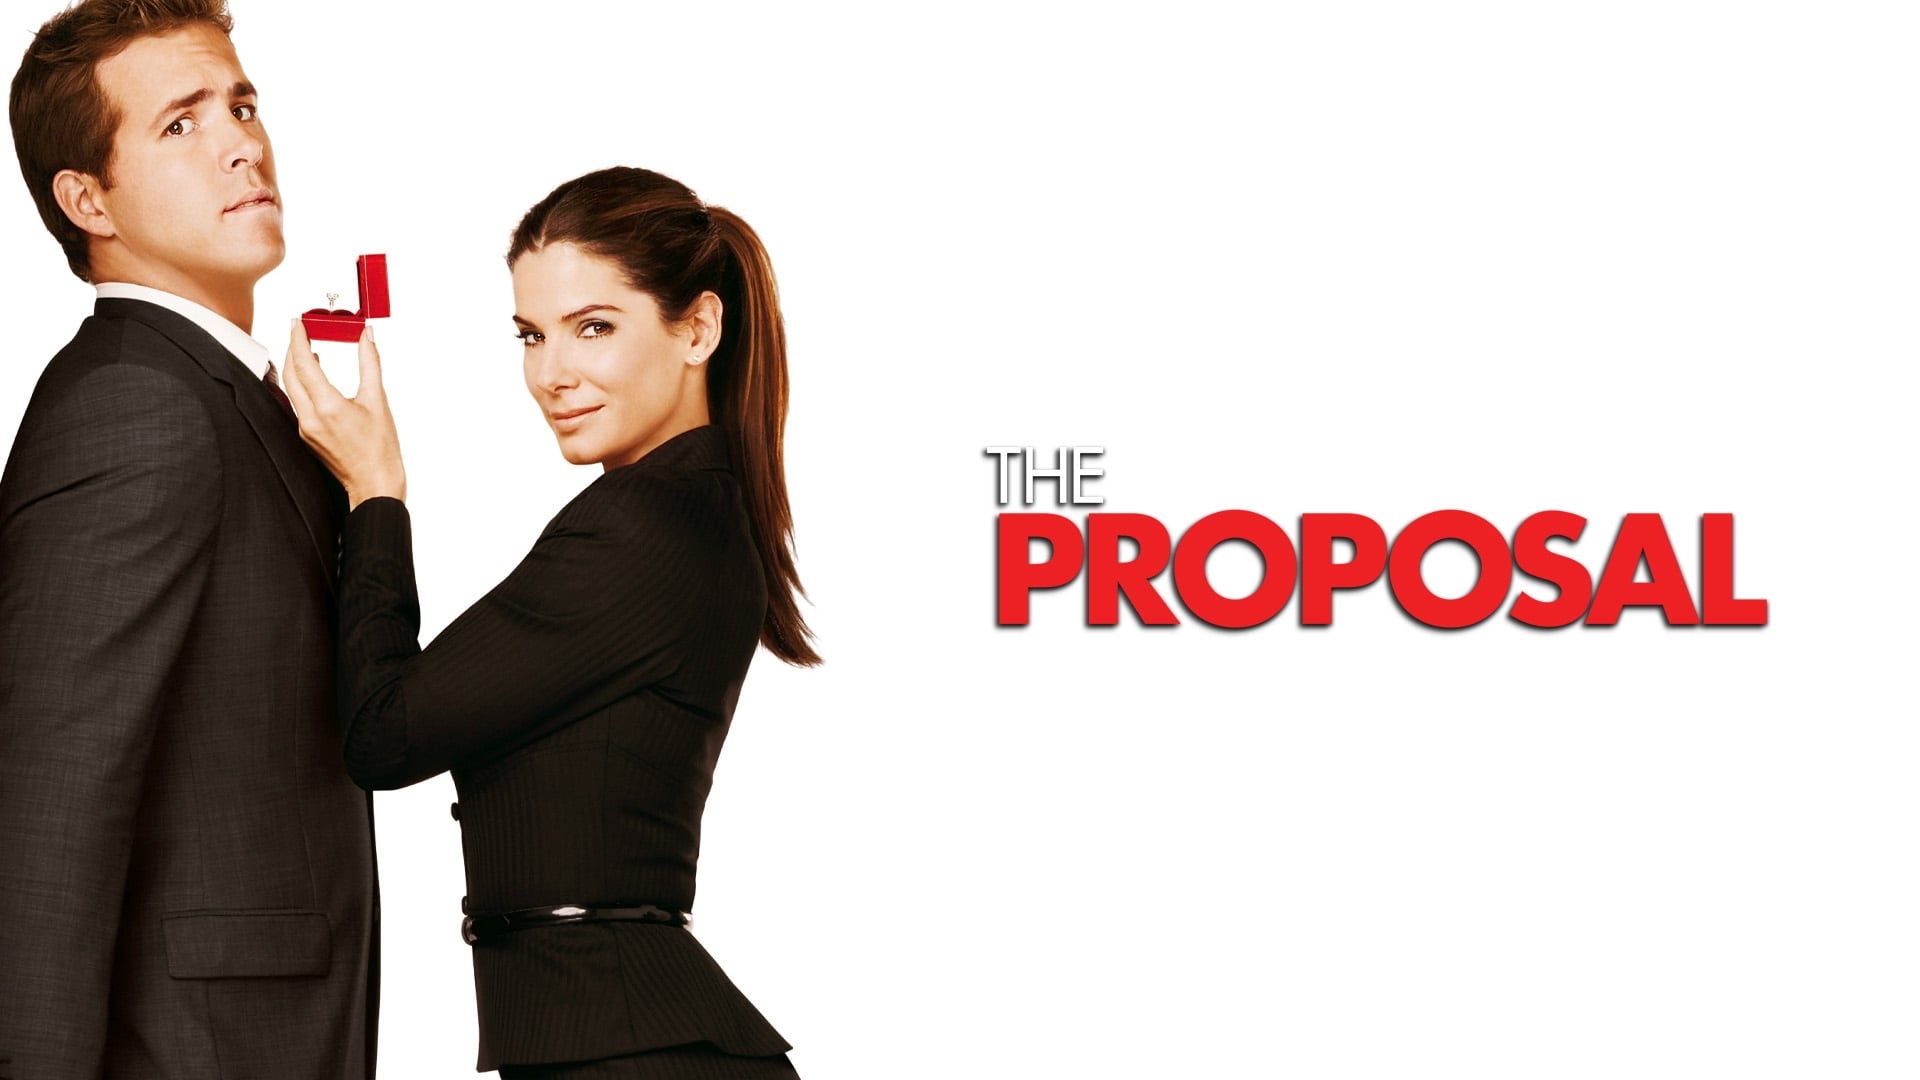 The Proposal (2009) movie fullHD. | Gostream Movies